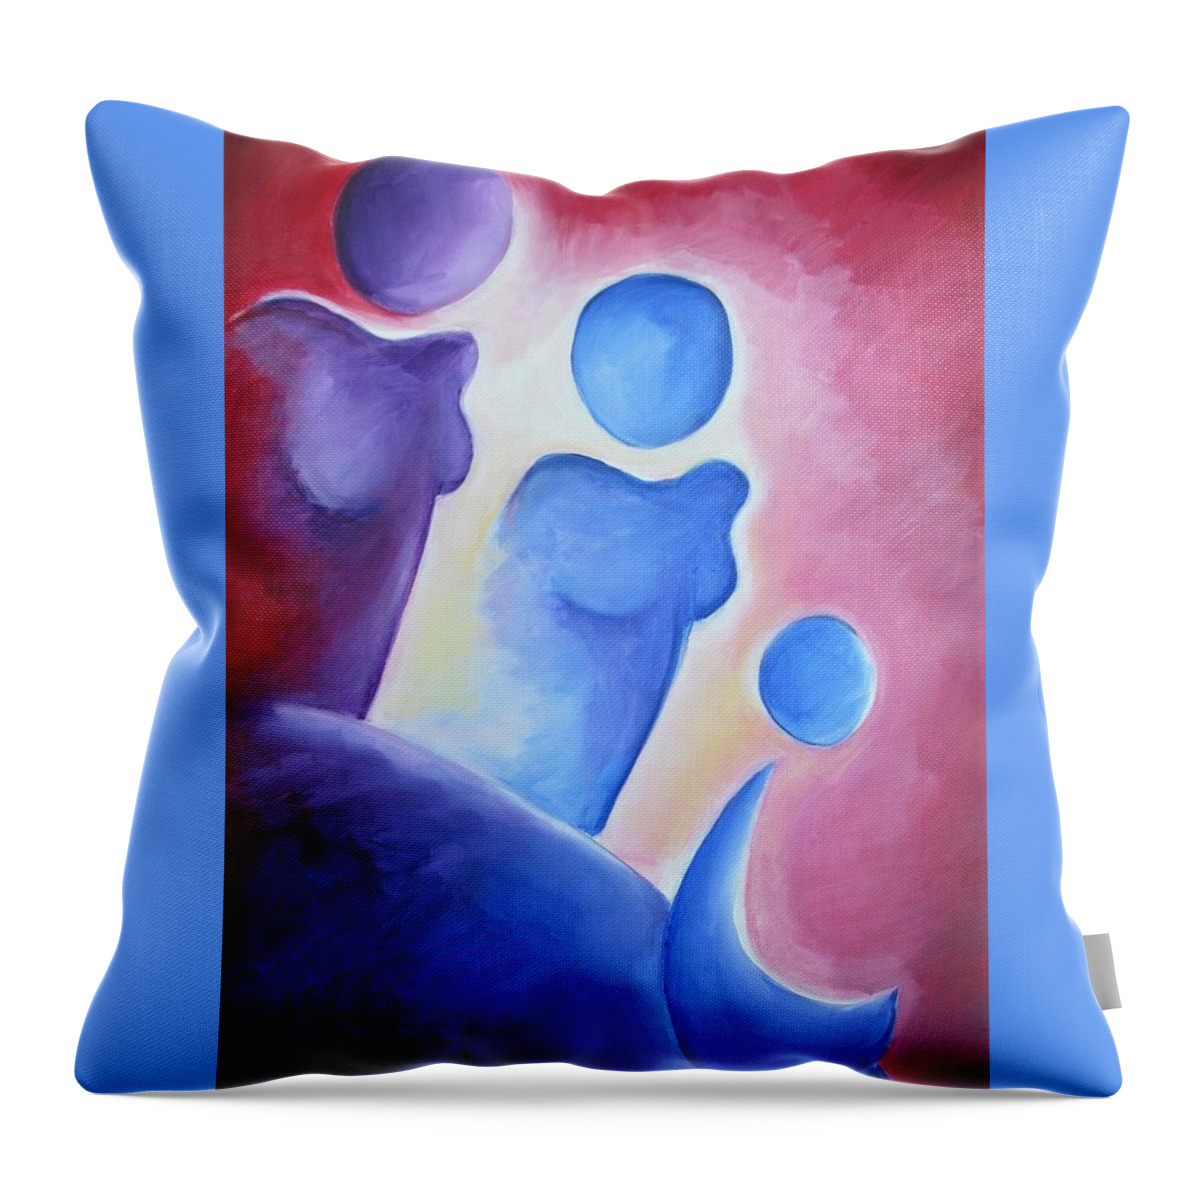 Figurative Abstracts Throw Pillow featuring the painting Still... along side us by Jennifer Hannigan-Green